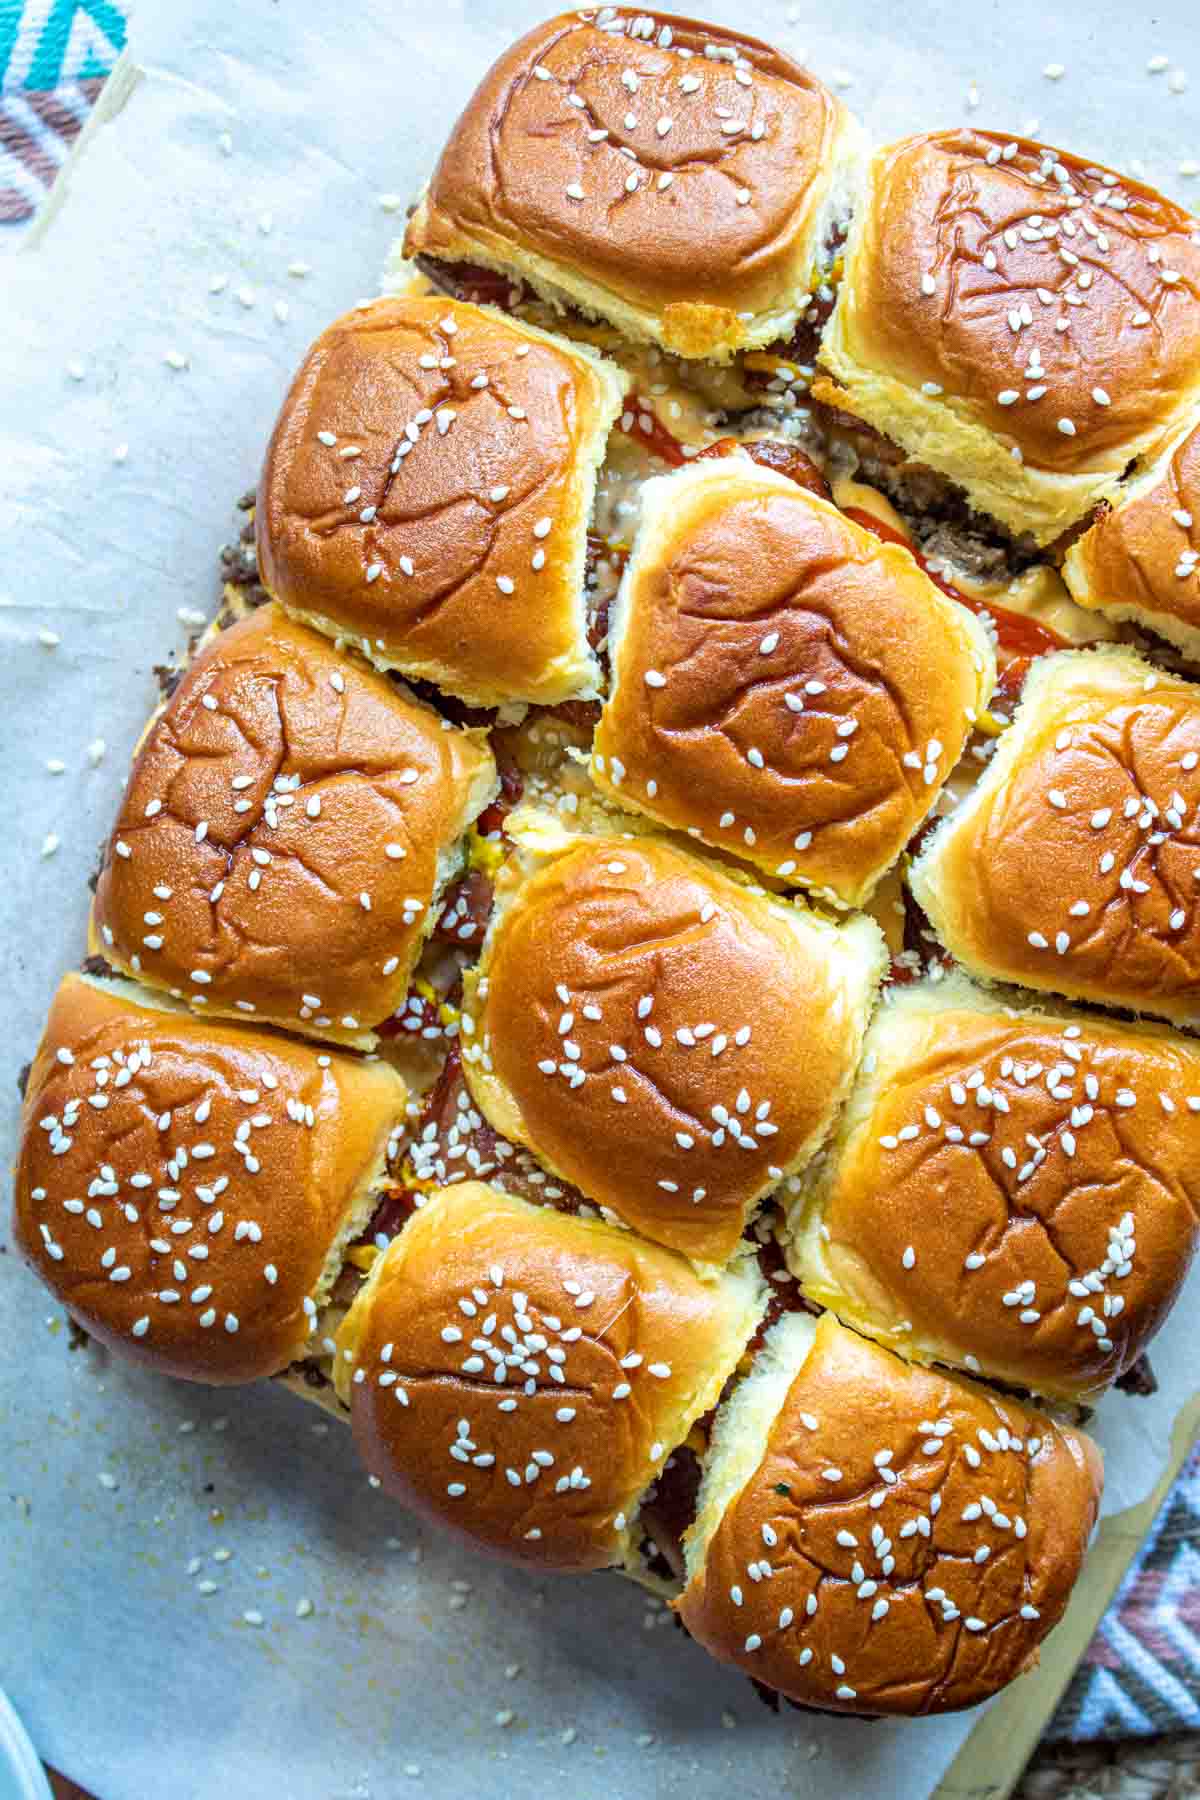 Bacon Cheeseburger Sliders topped with butter and sesame seeds